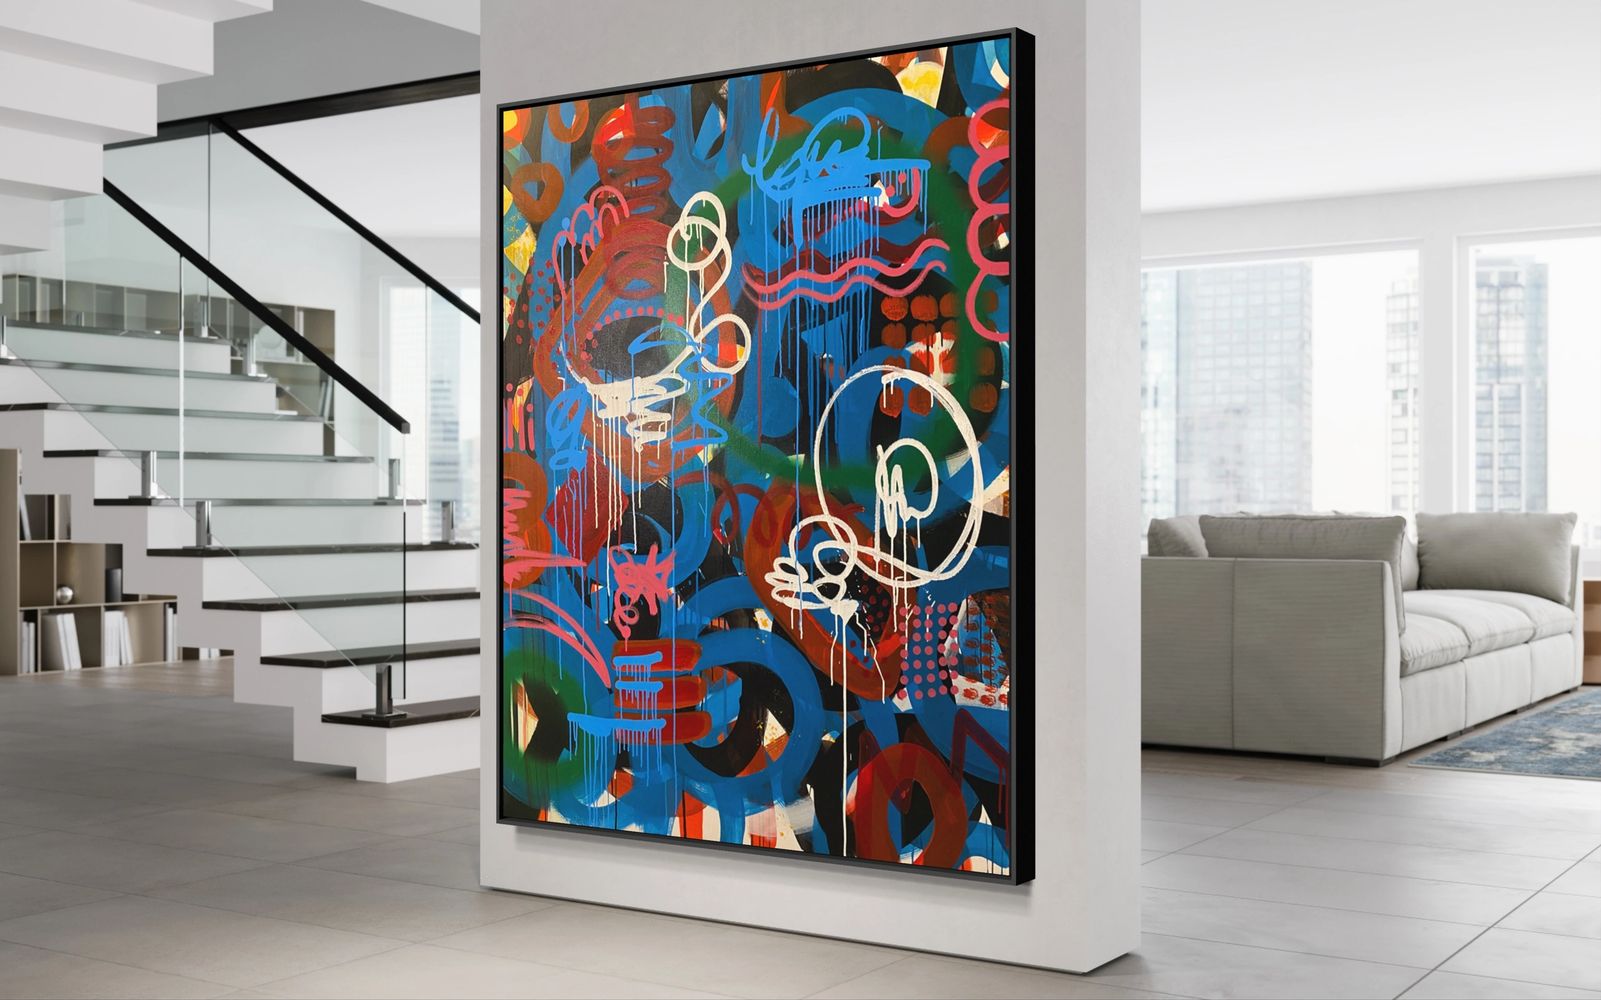 Sheneese’s Pieces original painting 
‘Purpose Driven’ 
48” X 60” gallery wrapped canvas